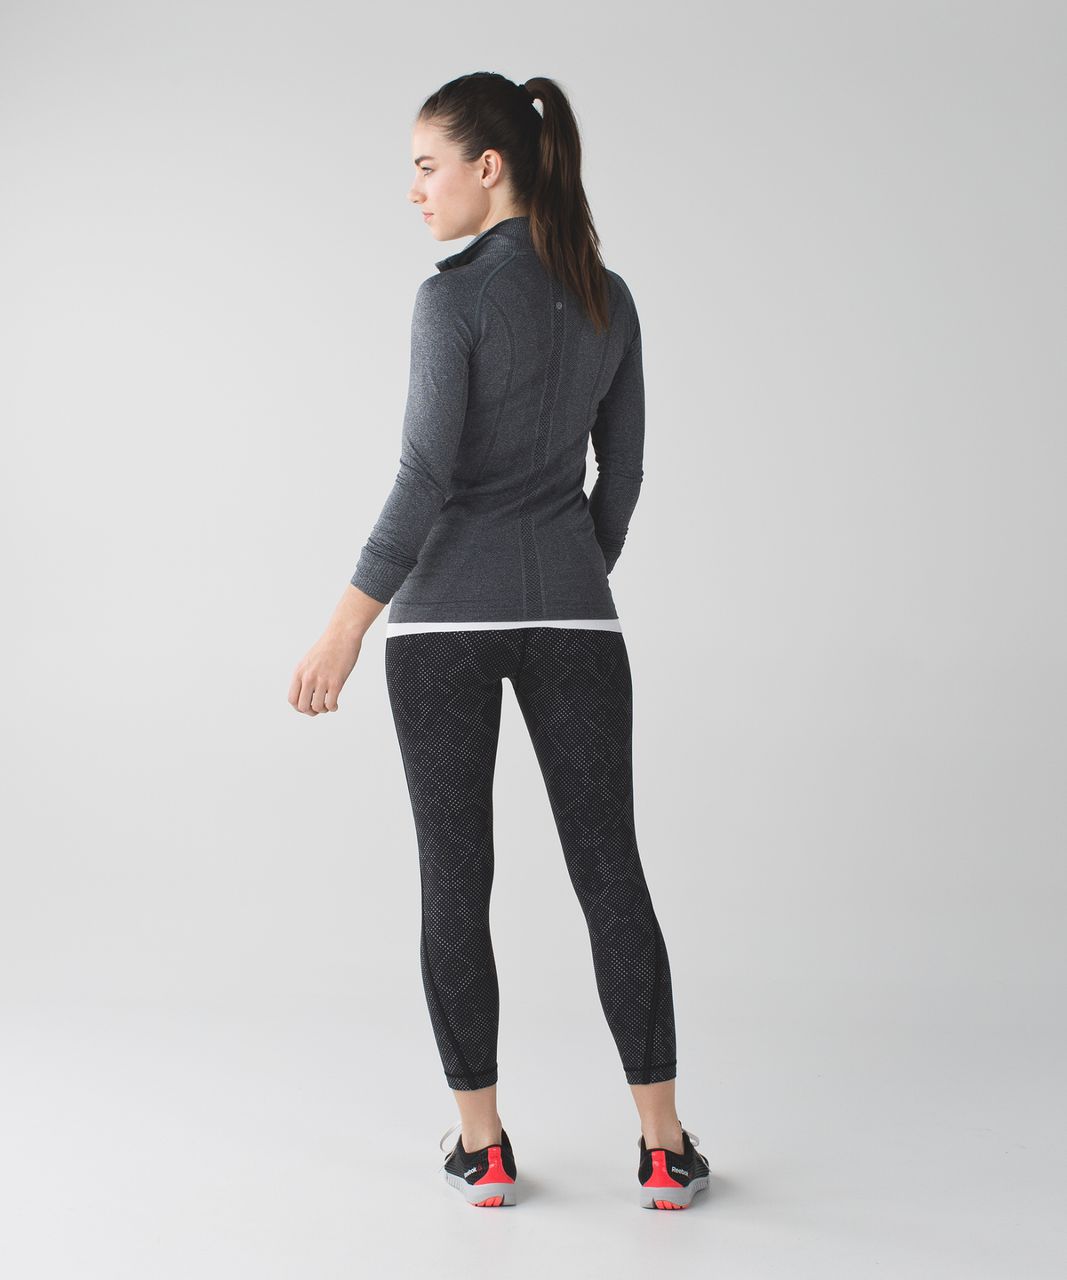 Lululemon Pace Tight (Full-On Luxtreme) *Lights Out - Black / Ravish Reptile Silver Black